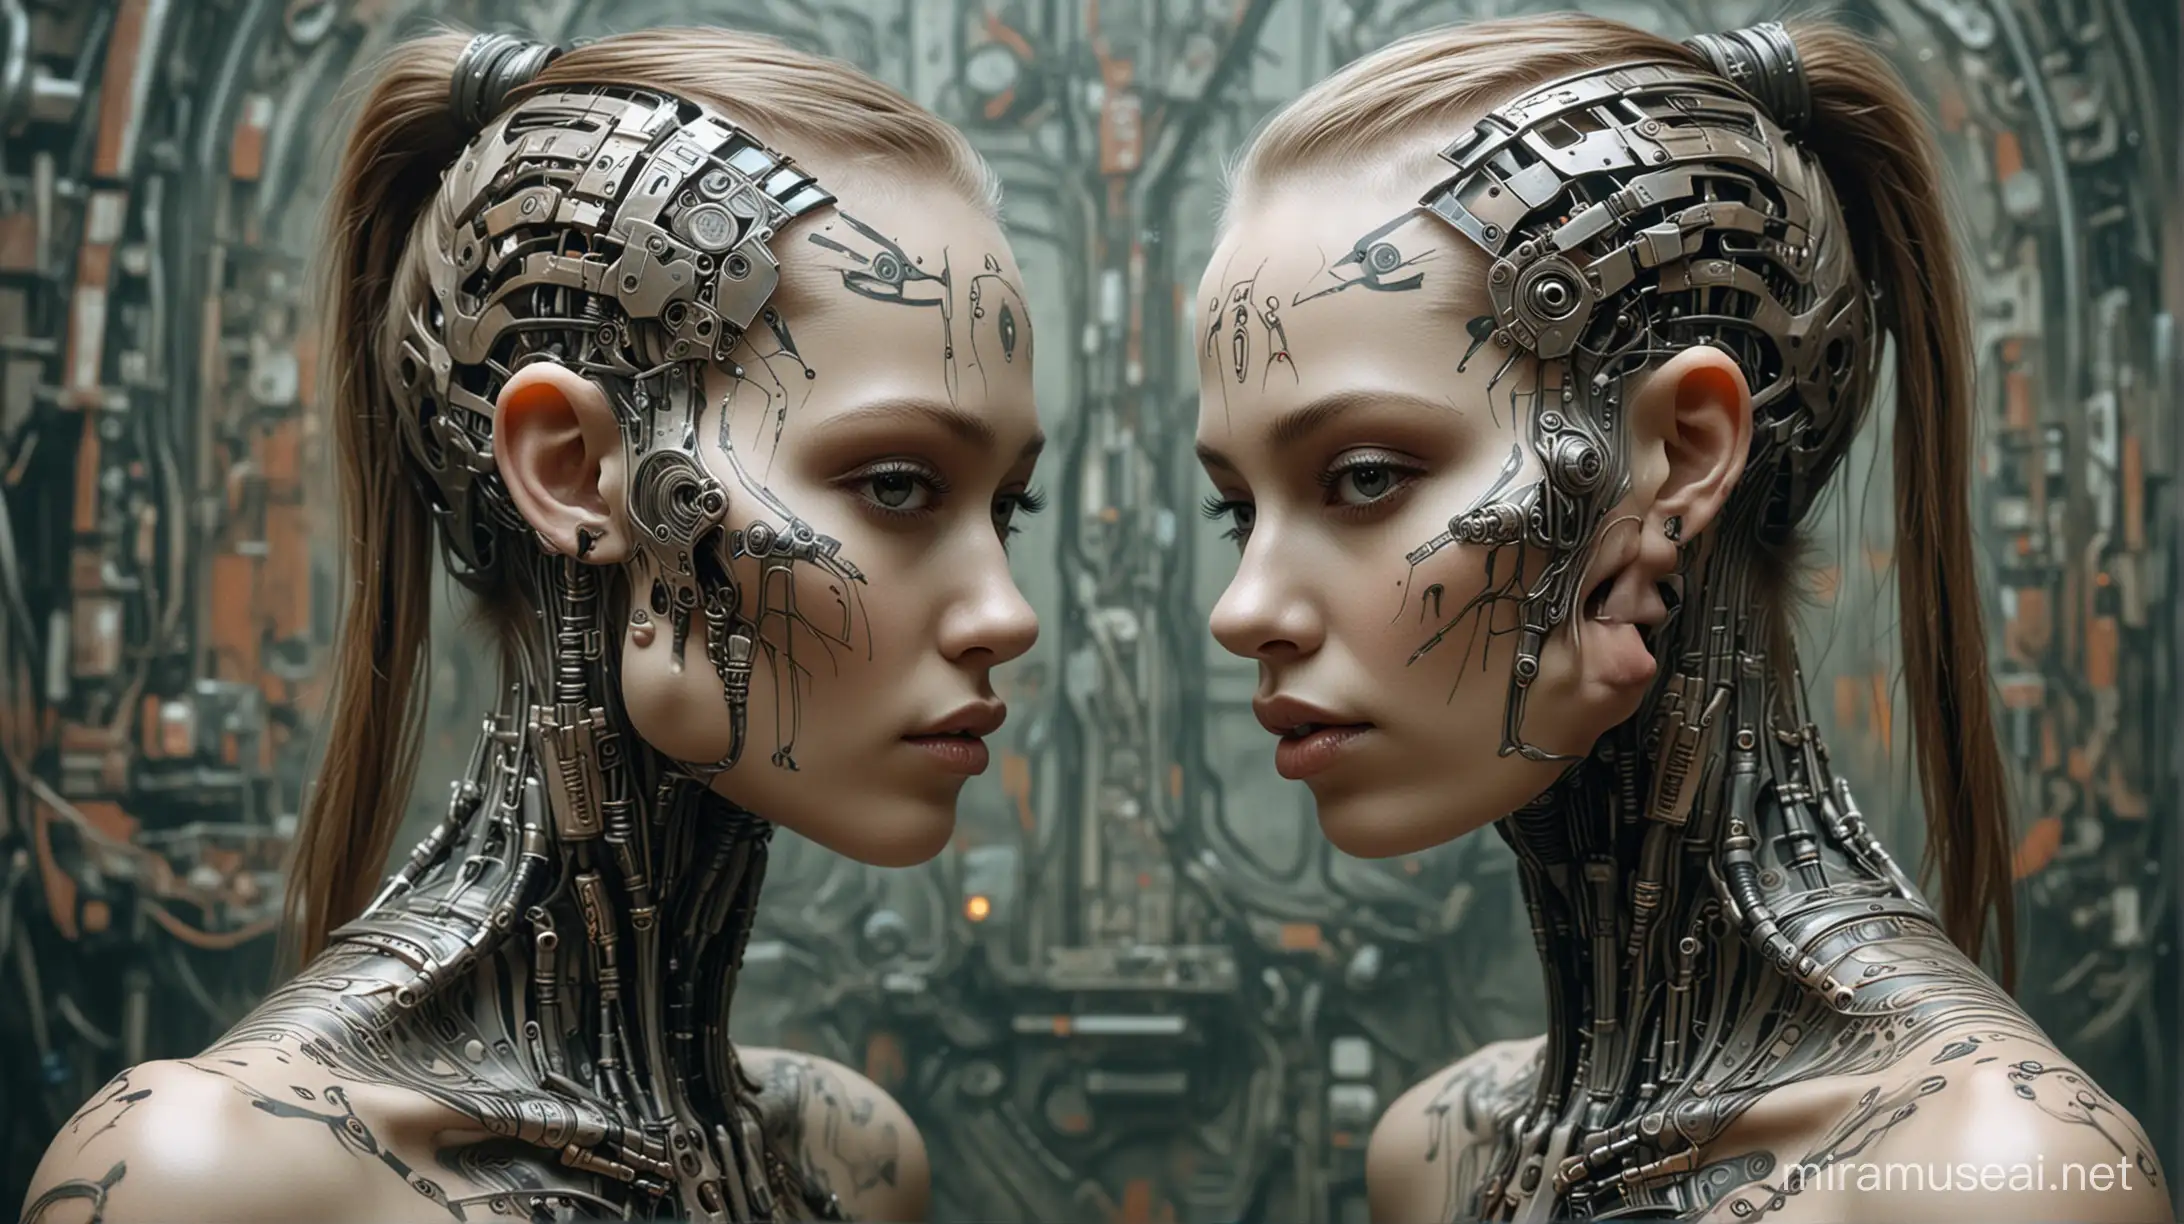 Futuristic Tribal Cybernetic Biomechanical Girls with Painted Faces Peter Gric Inspired Art